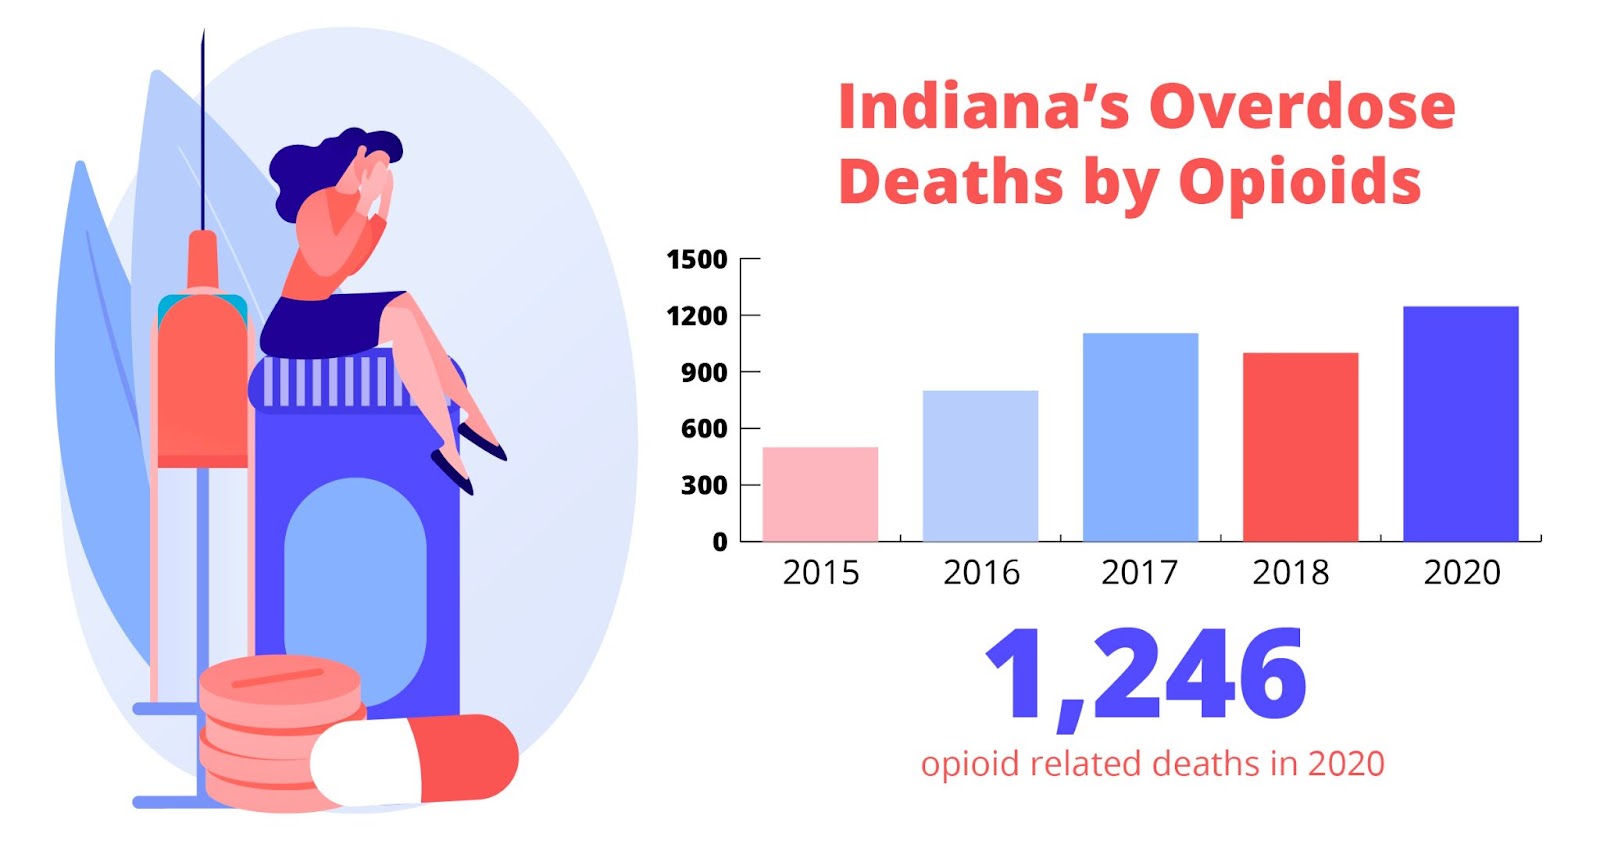 Indiana's overdose deaths by opioids graph. 1,246 opioid related deaths in 2020 South Bend Treatment for Drug Addiction or Alcoholism